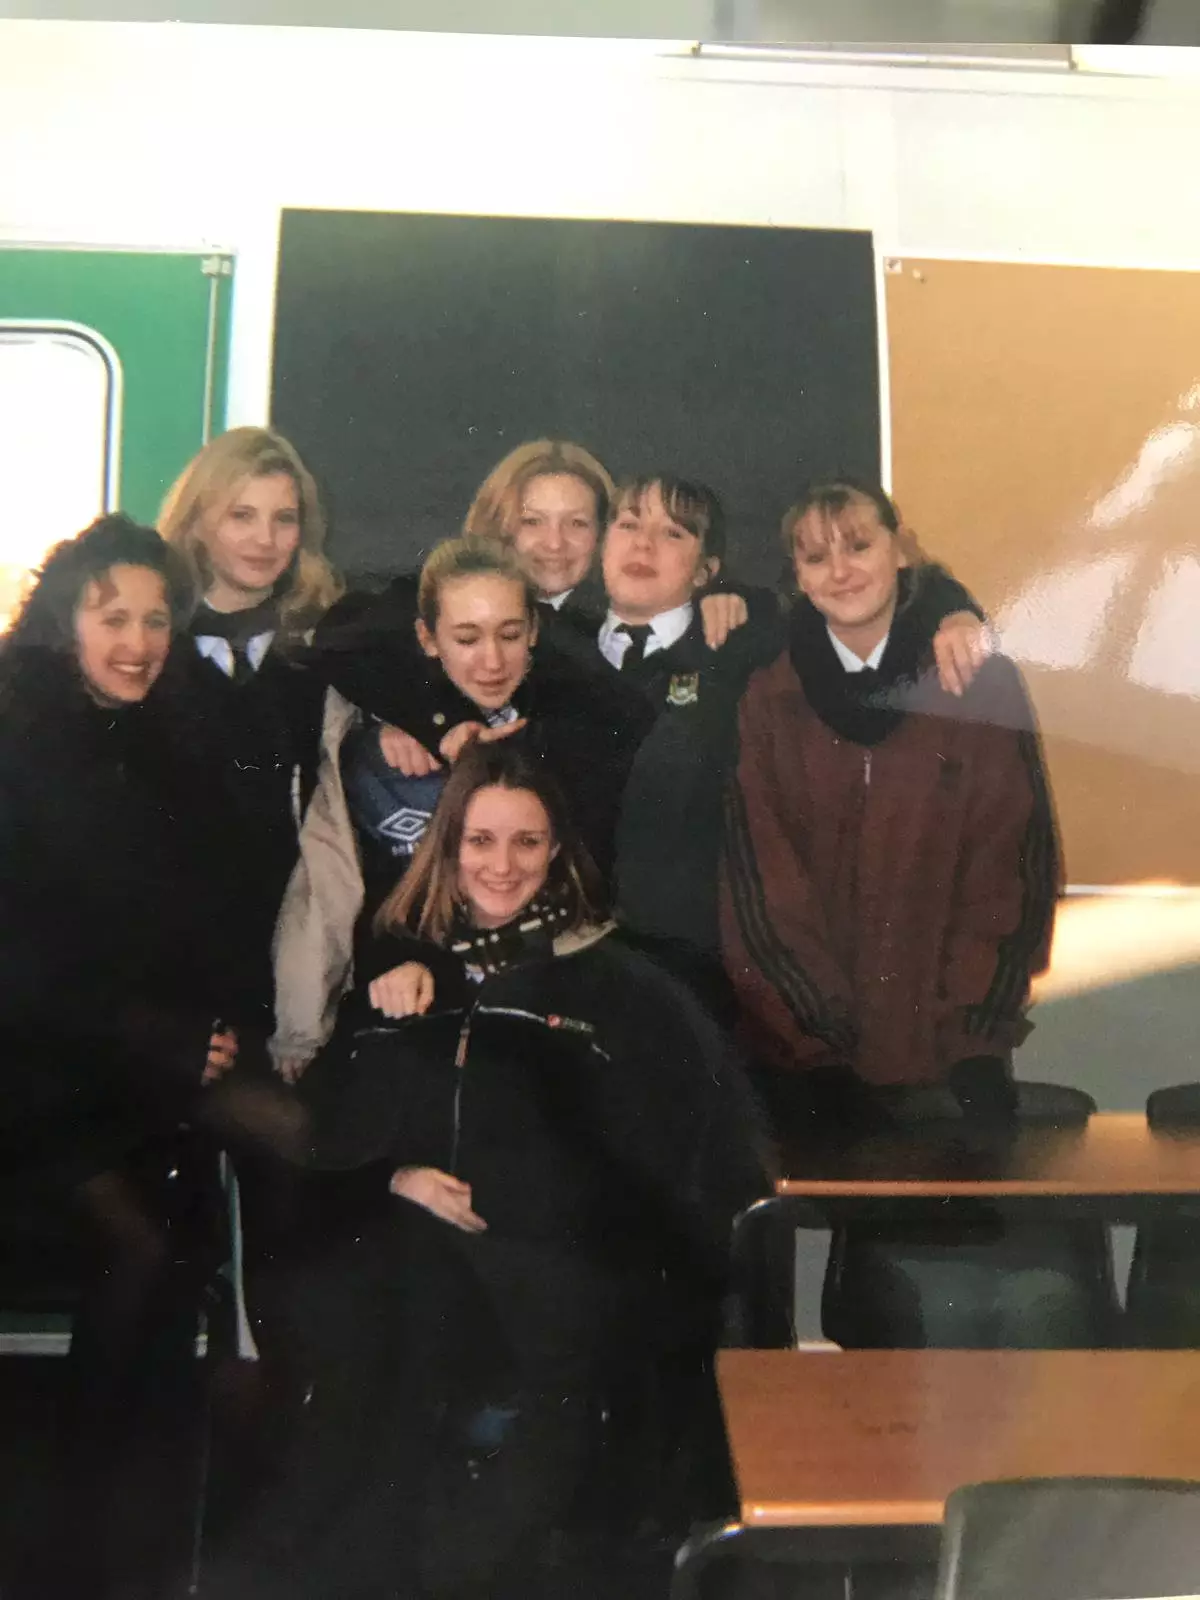 The girls when they were at school.